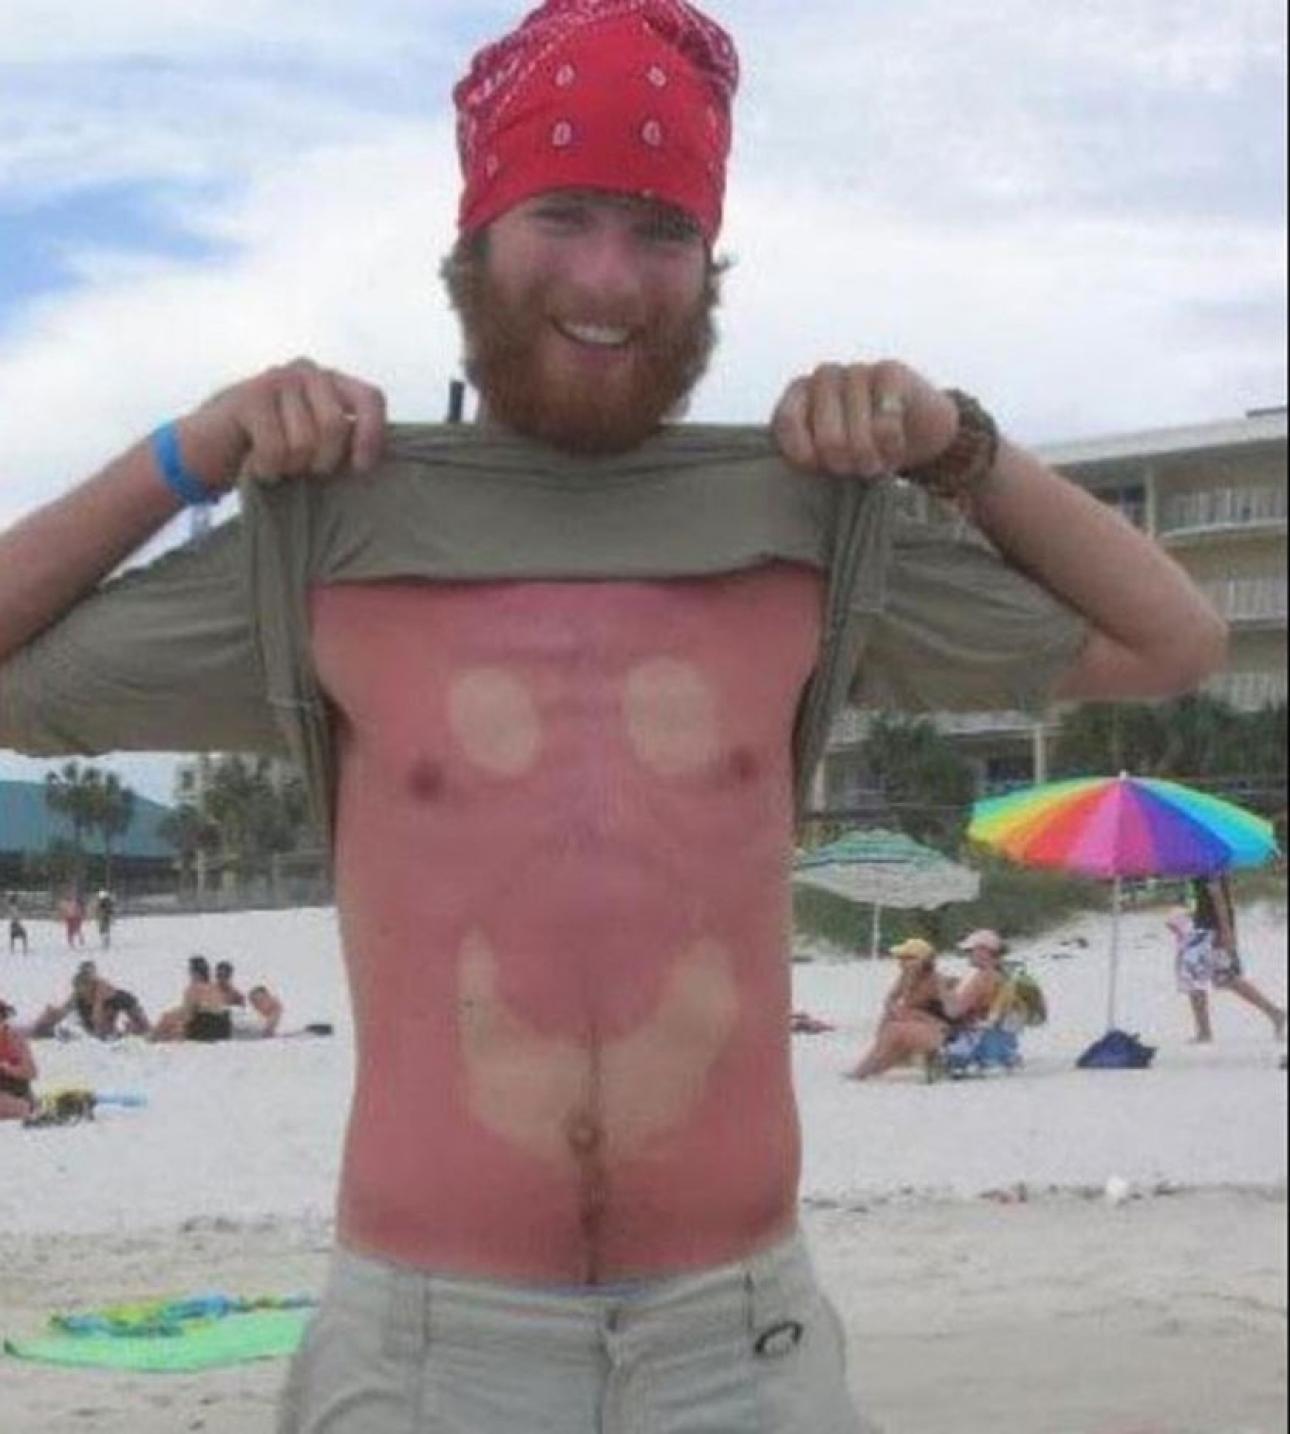 Sunburn Art is a Real Thing, and It's Glorious.